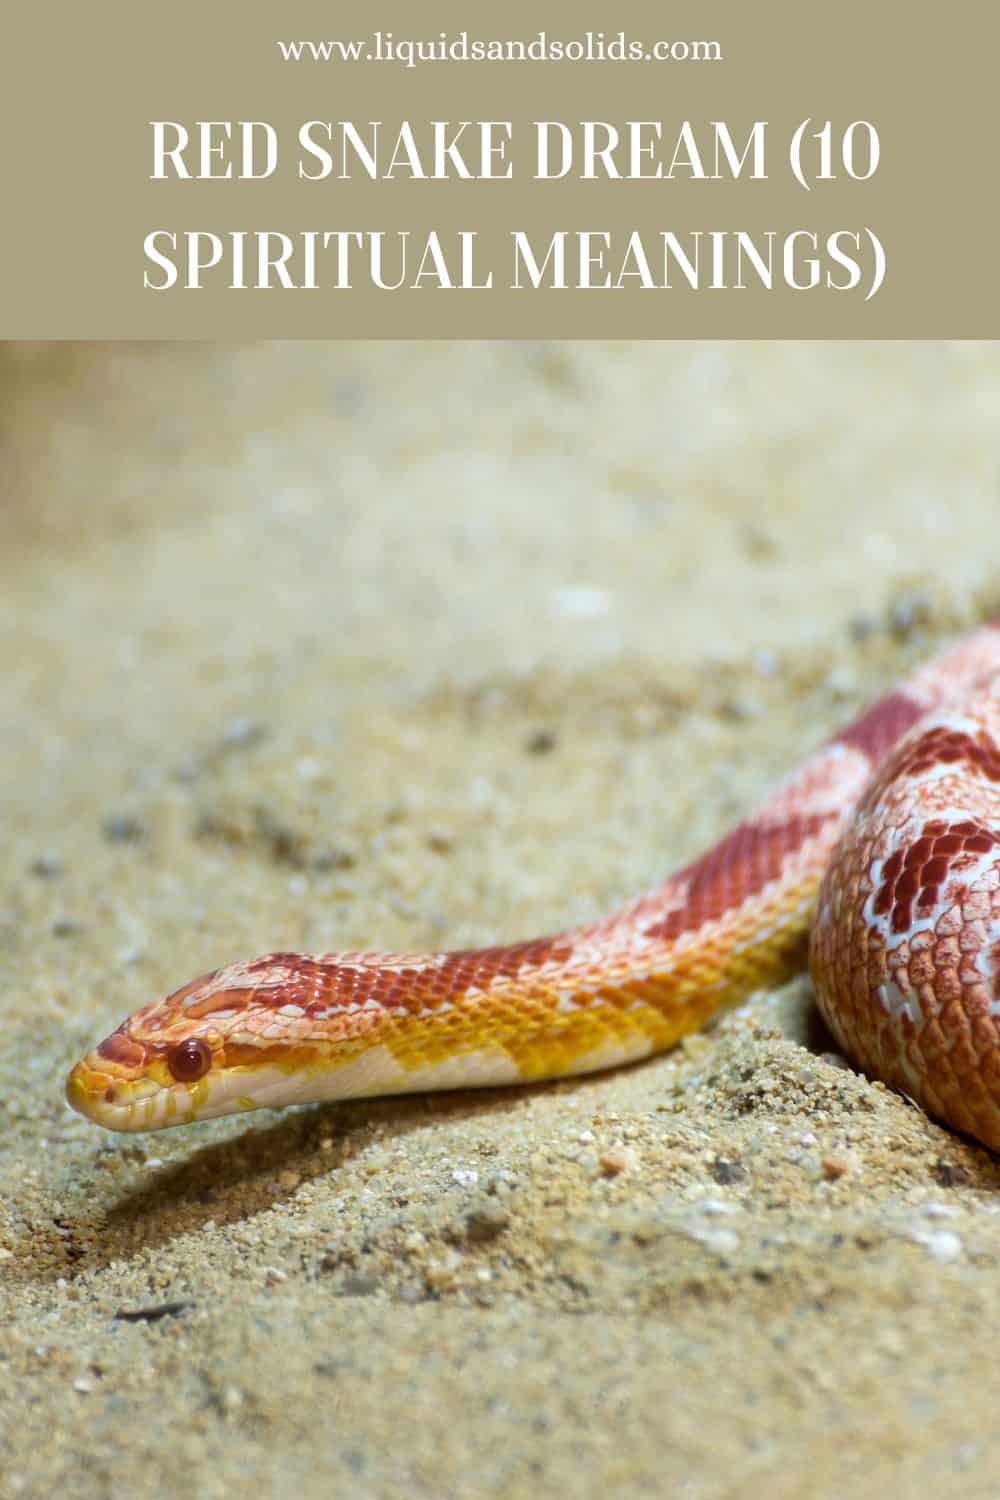 Dream about Red Snake? (10 Spiritual Meanings)